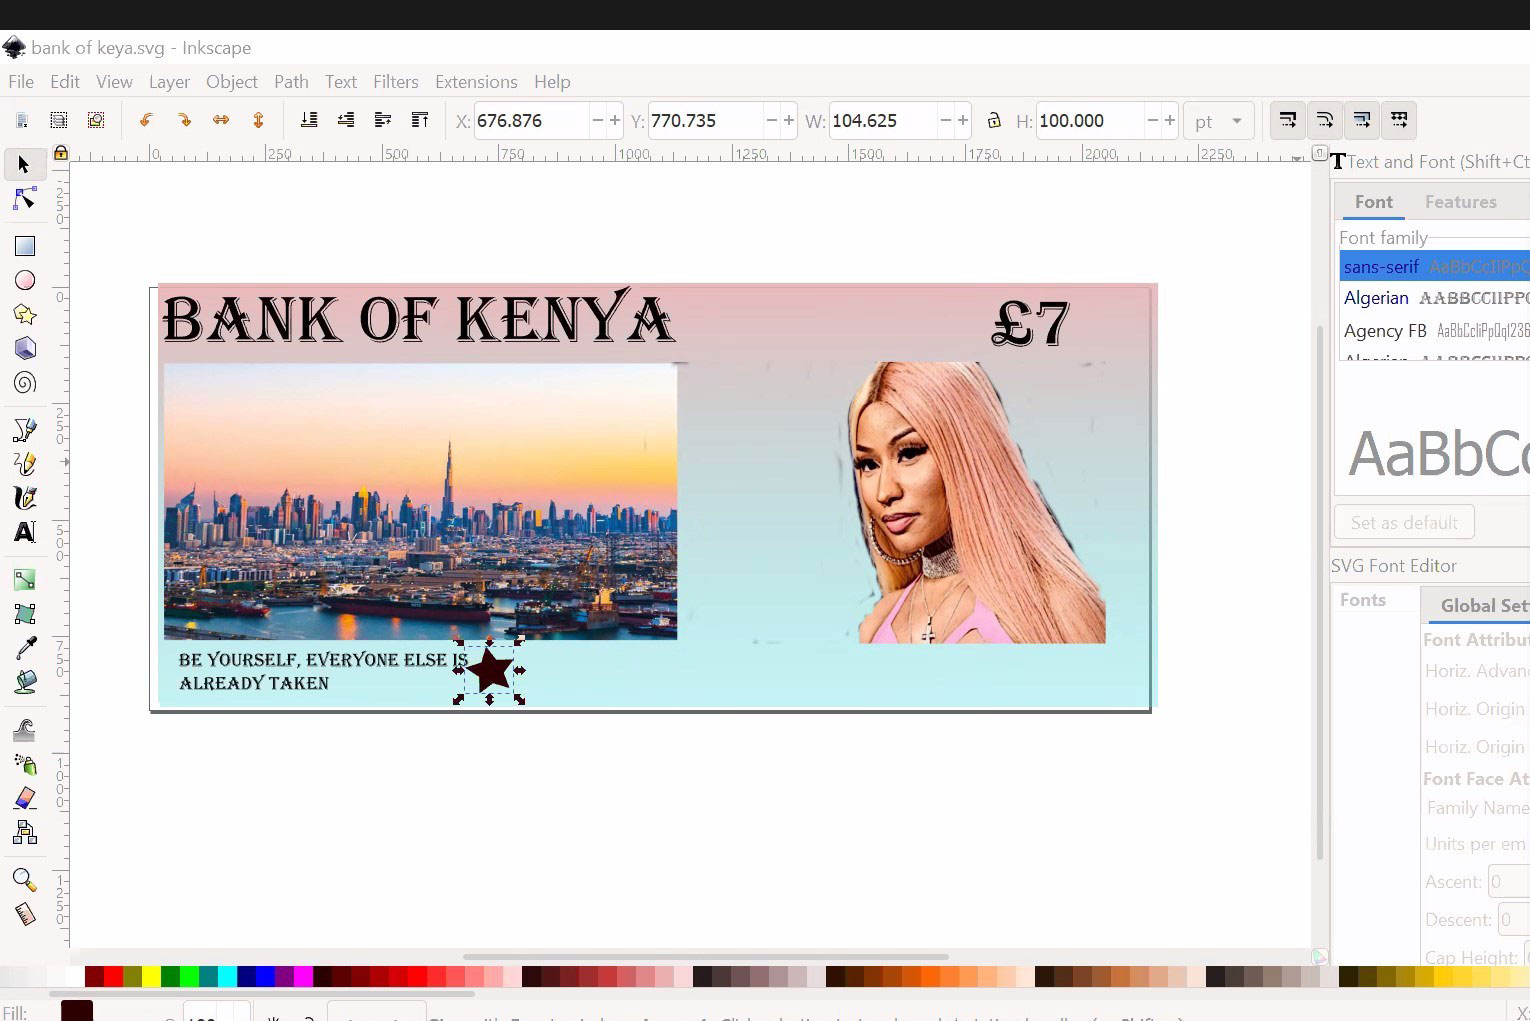 A screen shot of the currency created by a participant.